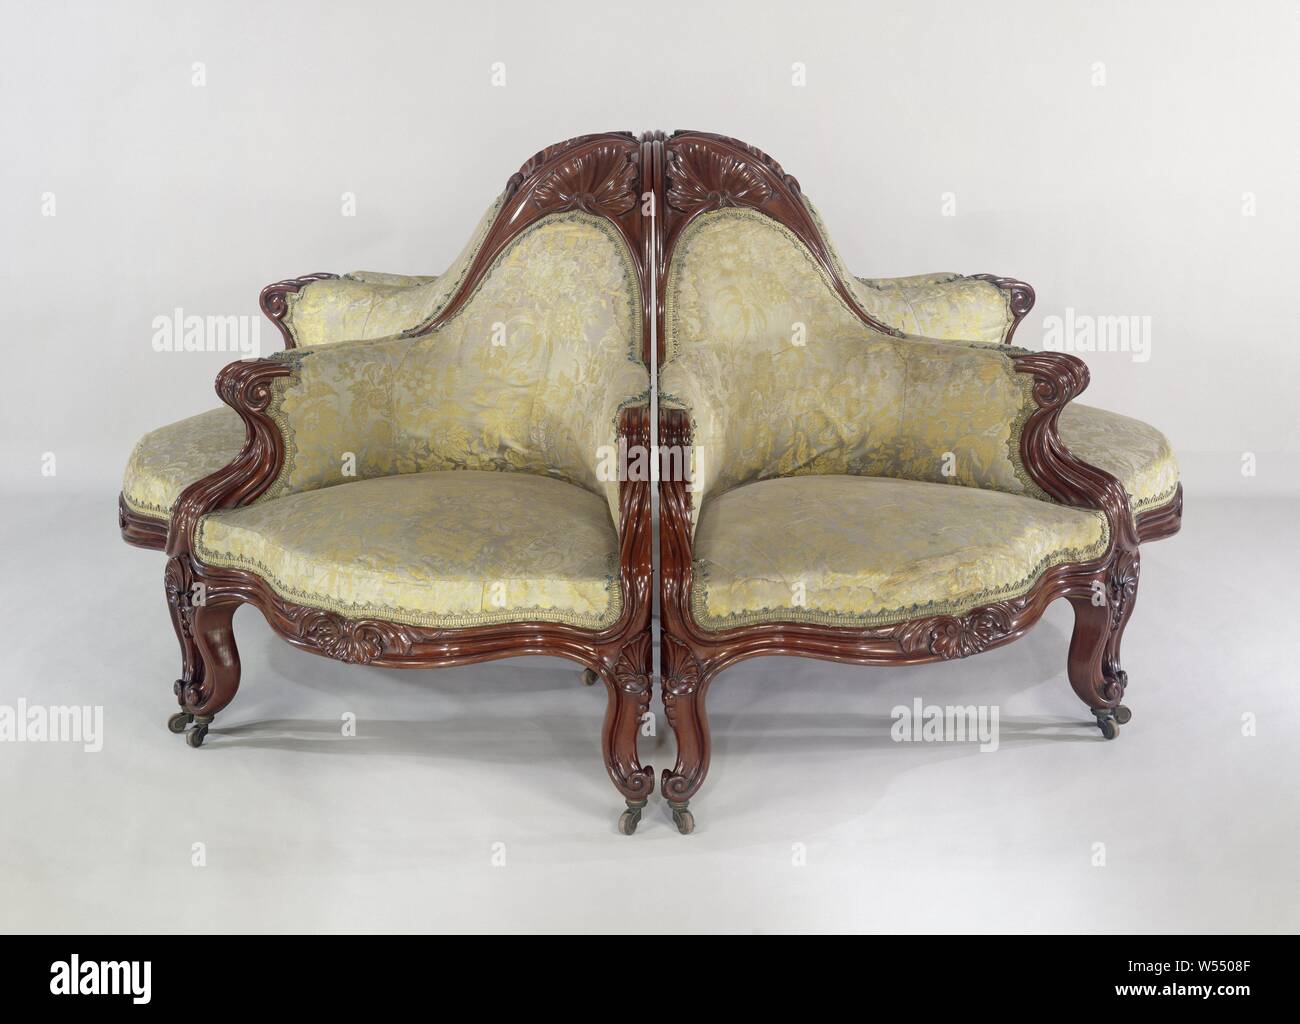 Armchair, part of a environmental divan, Armchair belonging to a set of six armchairs made of mahogany with a triangular base, forming a round sofa. Floral silk trim with trimmings. The two angled placed front legs, the rear leg, lines, struts, armrests and the crown of the backrest are bent, profiled and almost all end up in a volute. The armrests close the backrest in an arched shape and form a triangular crown that, like the fore-end and the swellings of the front legs, has shell-shaped acanthus leaves., Gebroeders Horrix, The Hague, c. 1852, wood (plant material), mahogany (wood), silk Stock Photo